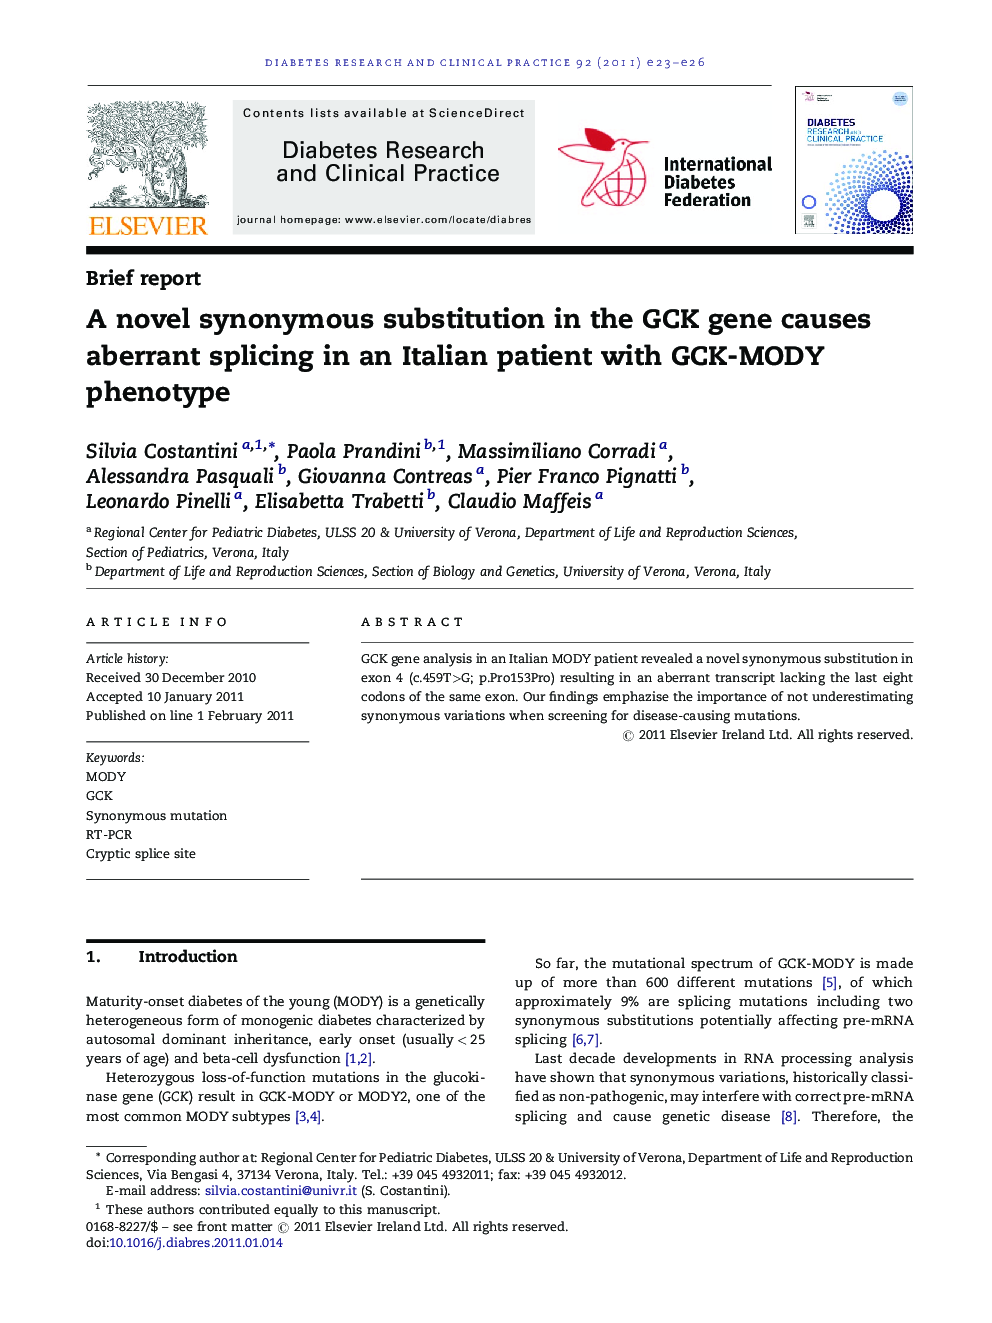 A novel synonymous substitution in the GCK gene causes aberrant splicing in an Italian patient with GCK-MODY phenotype